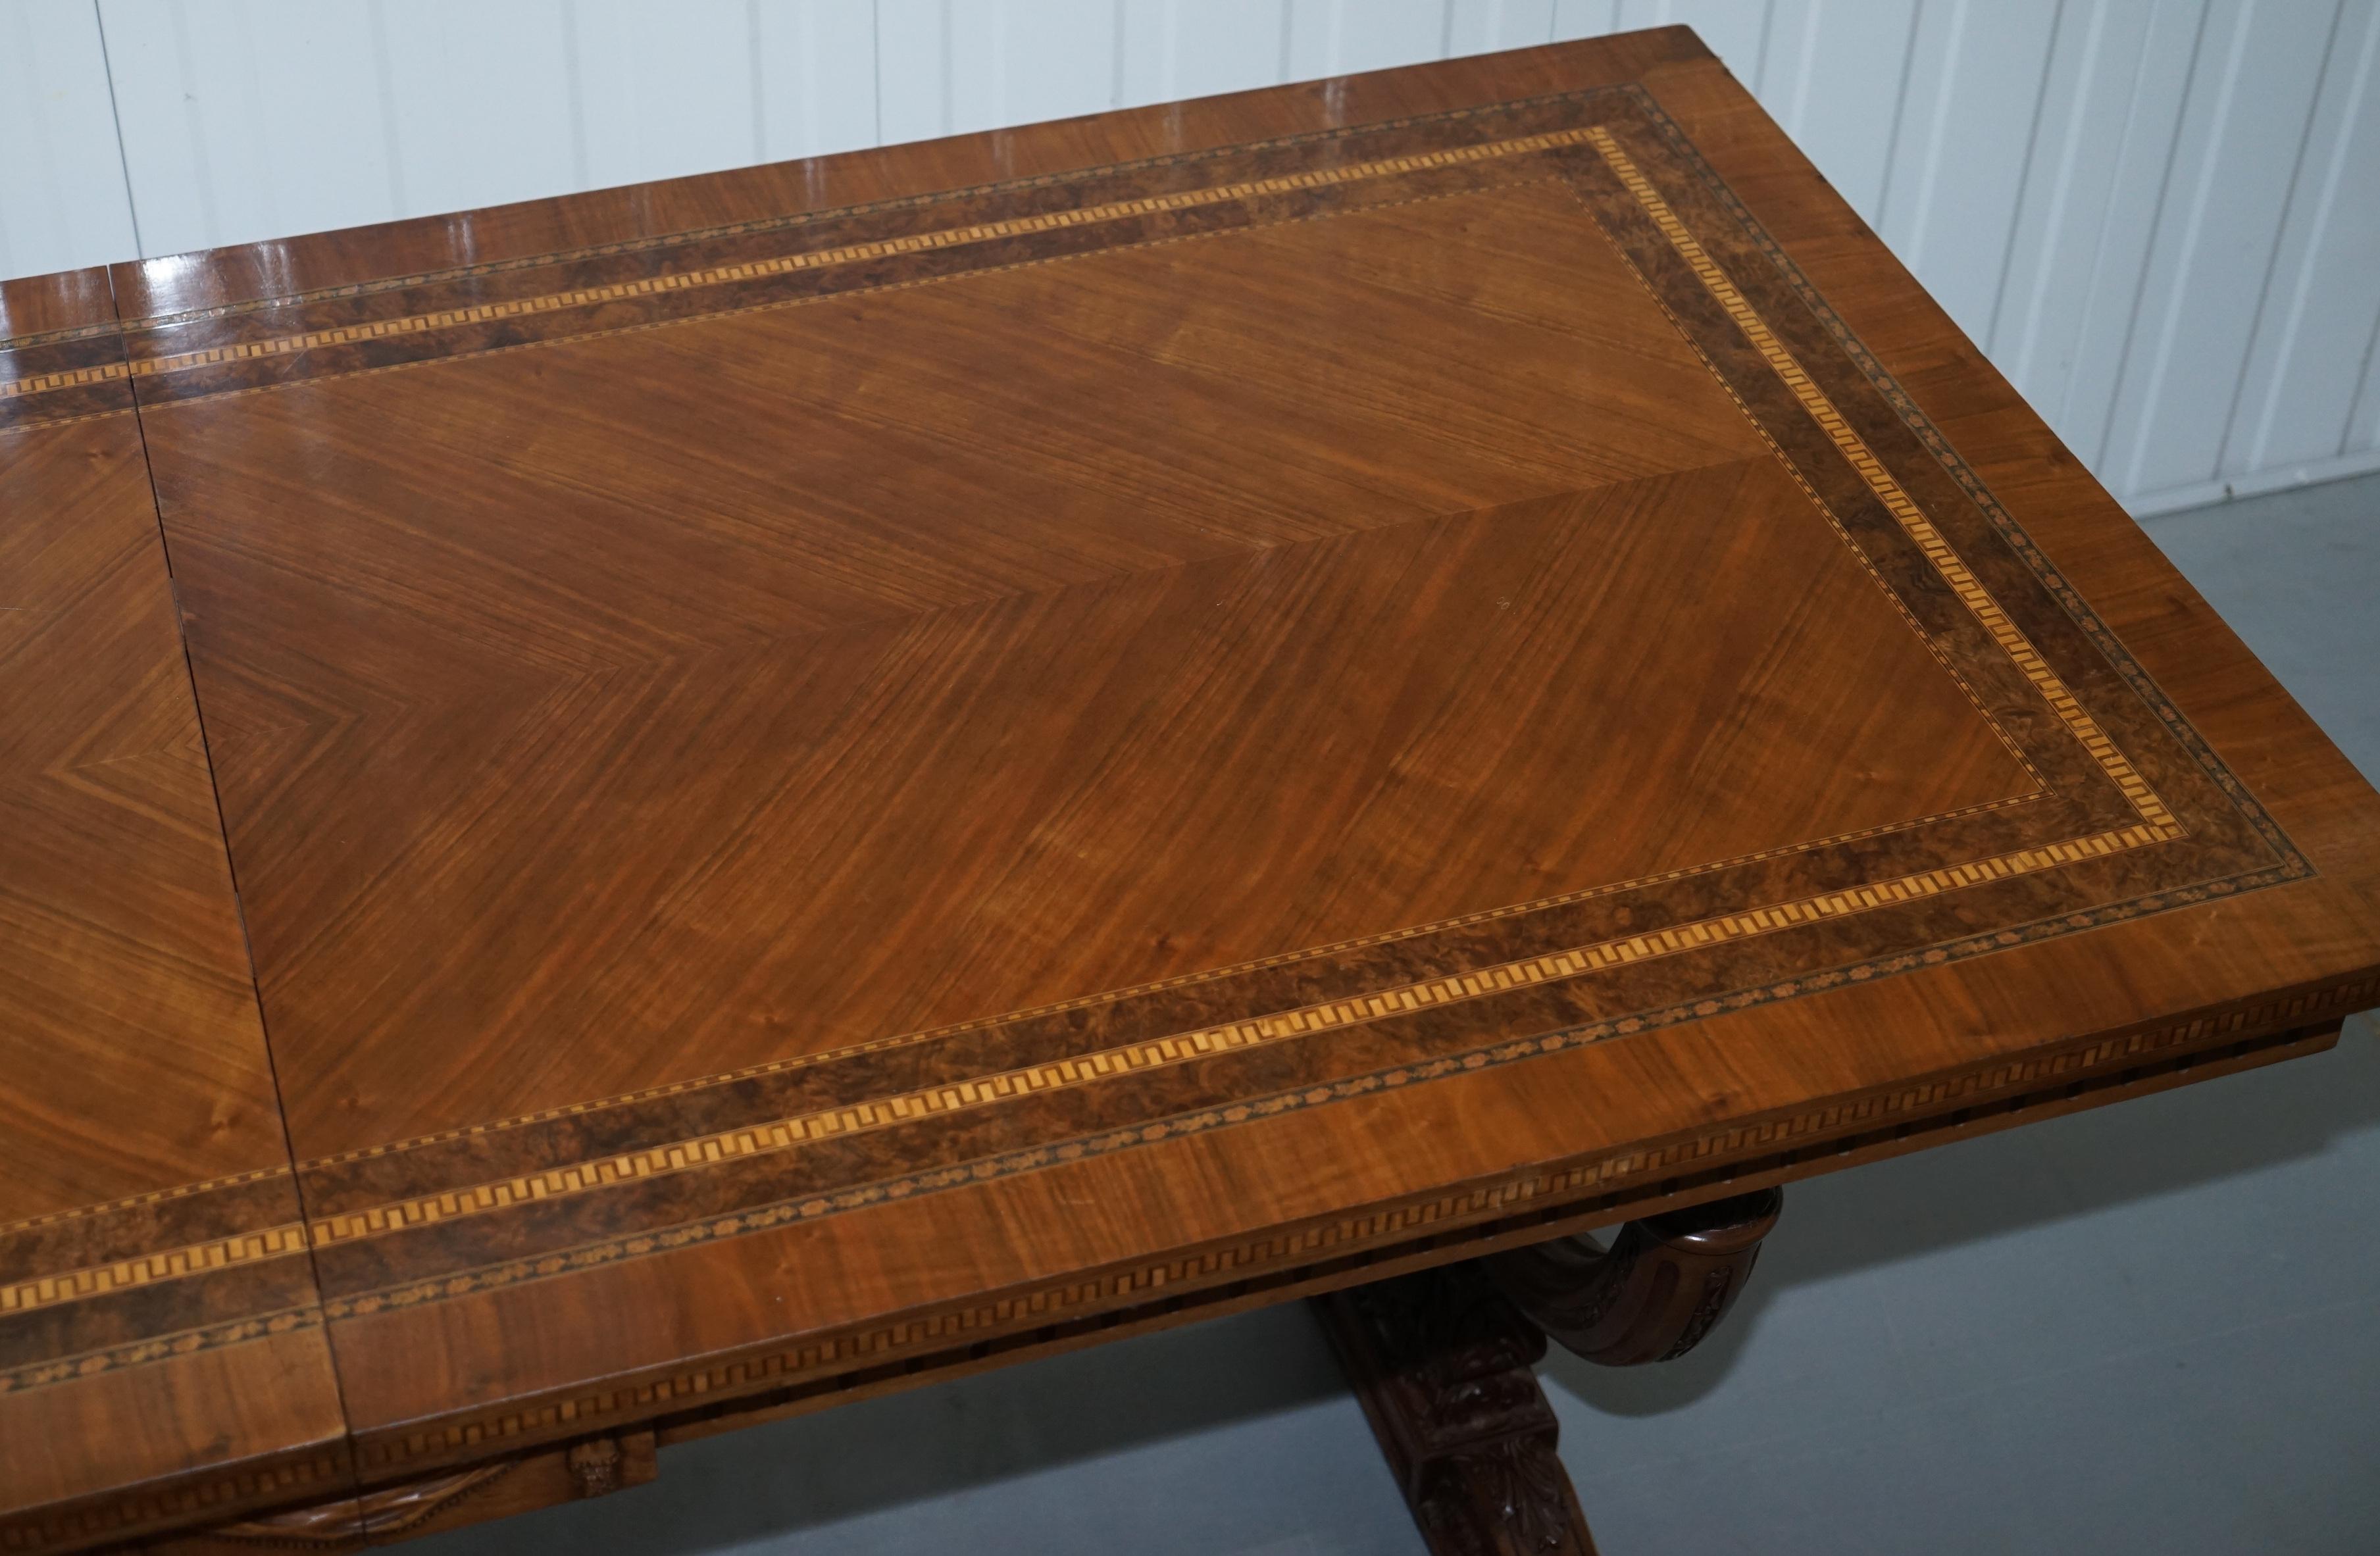 Hand-Carved Antique Italian Walnut Extending Dining Table Stunning Imperial